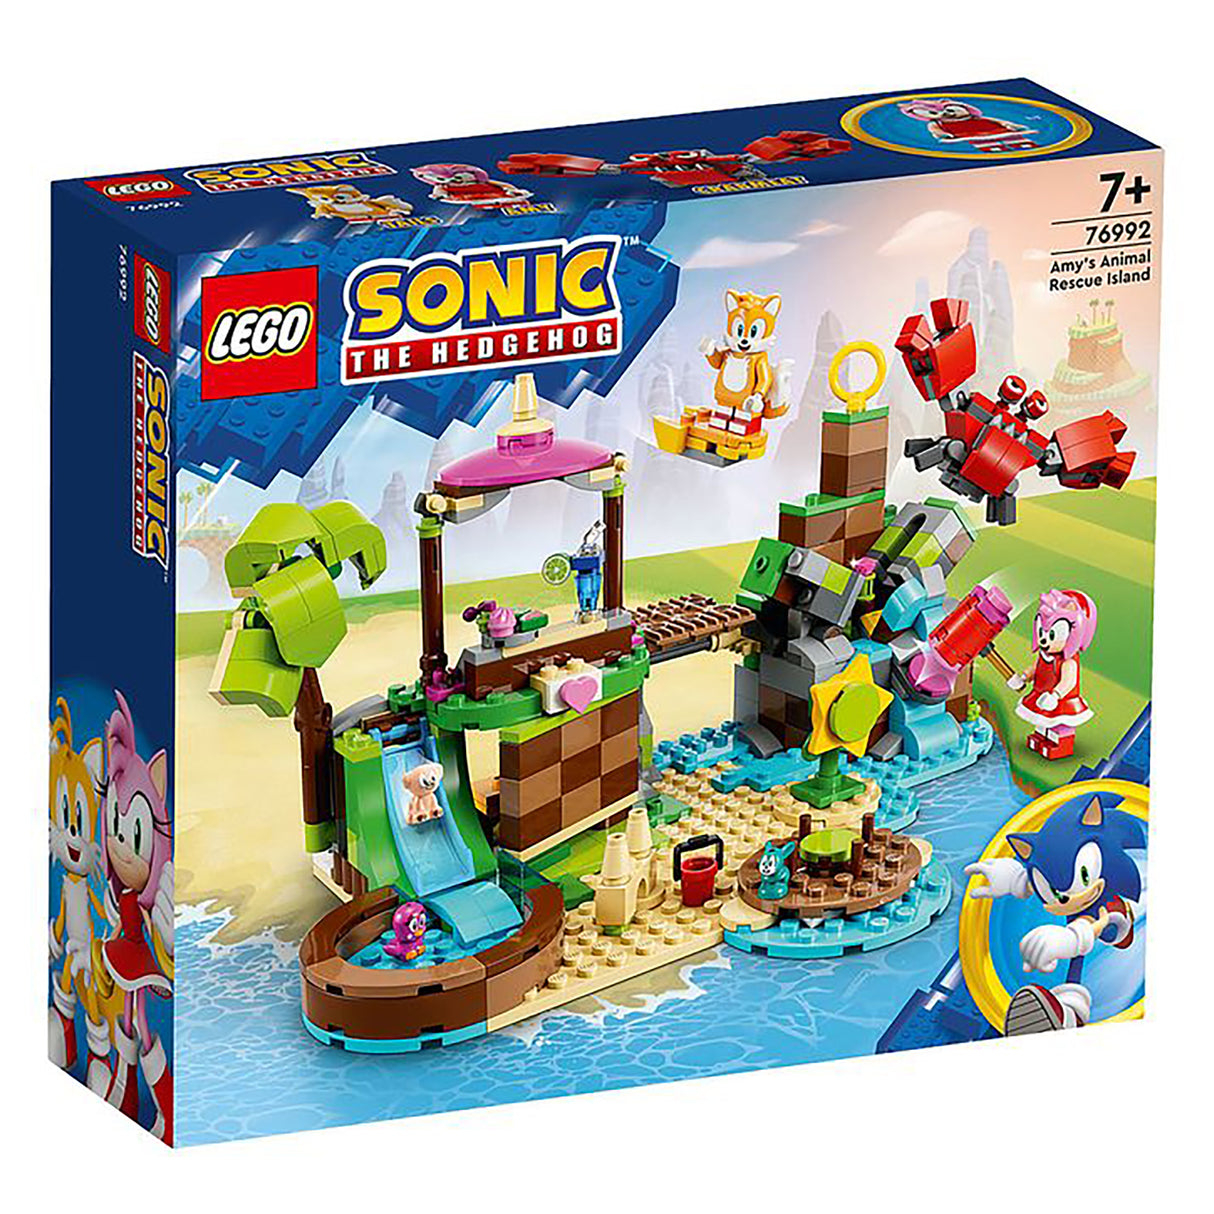 LEGO Sonic the Hedgehog Amy's Animal Rescue Island 76992 (388 pieces)